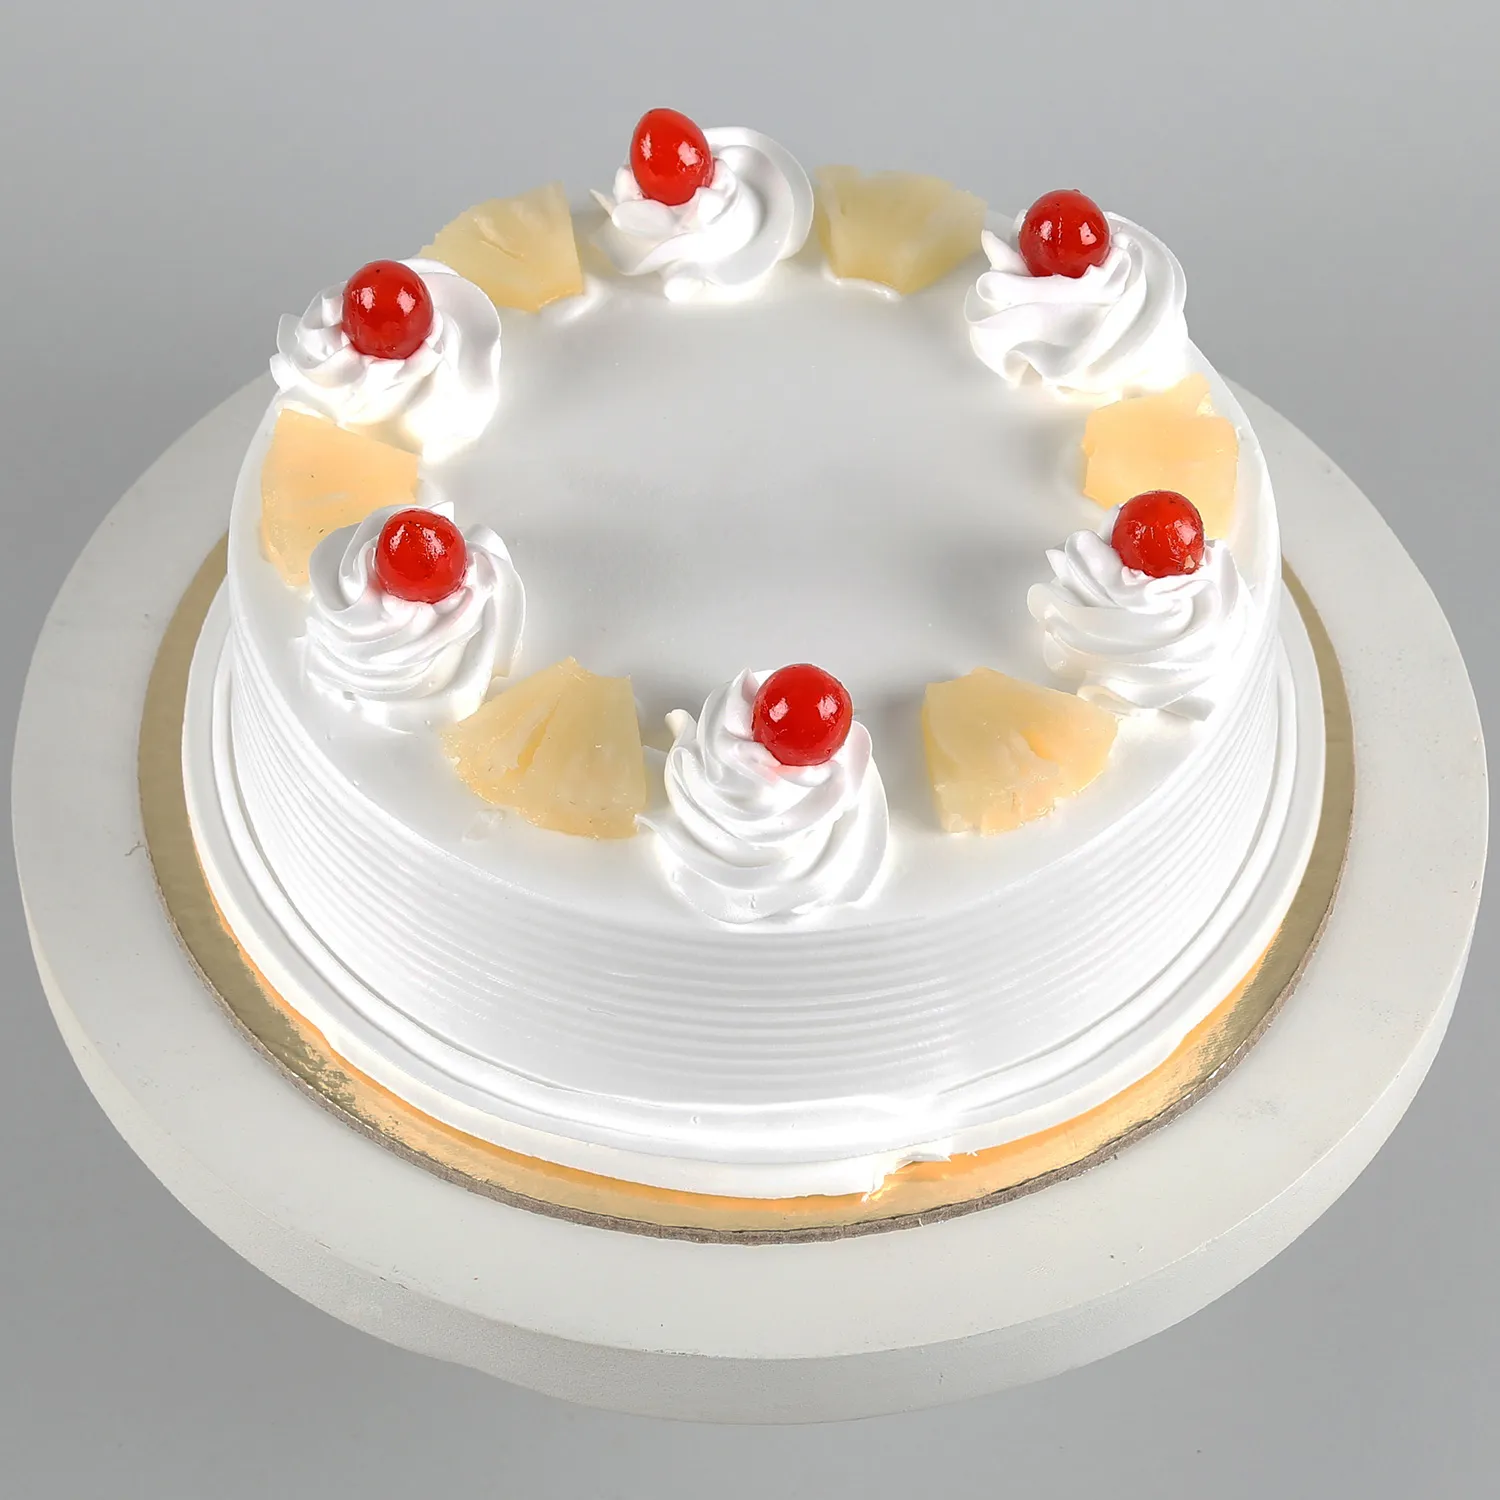 Order Online New Year Pineapple Cake From #1 Cake Delivery Platform -  Winni.in | Winni.in